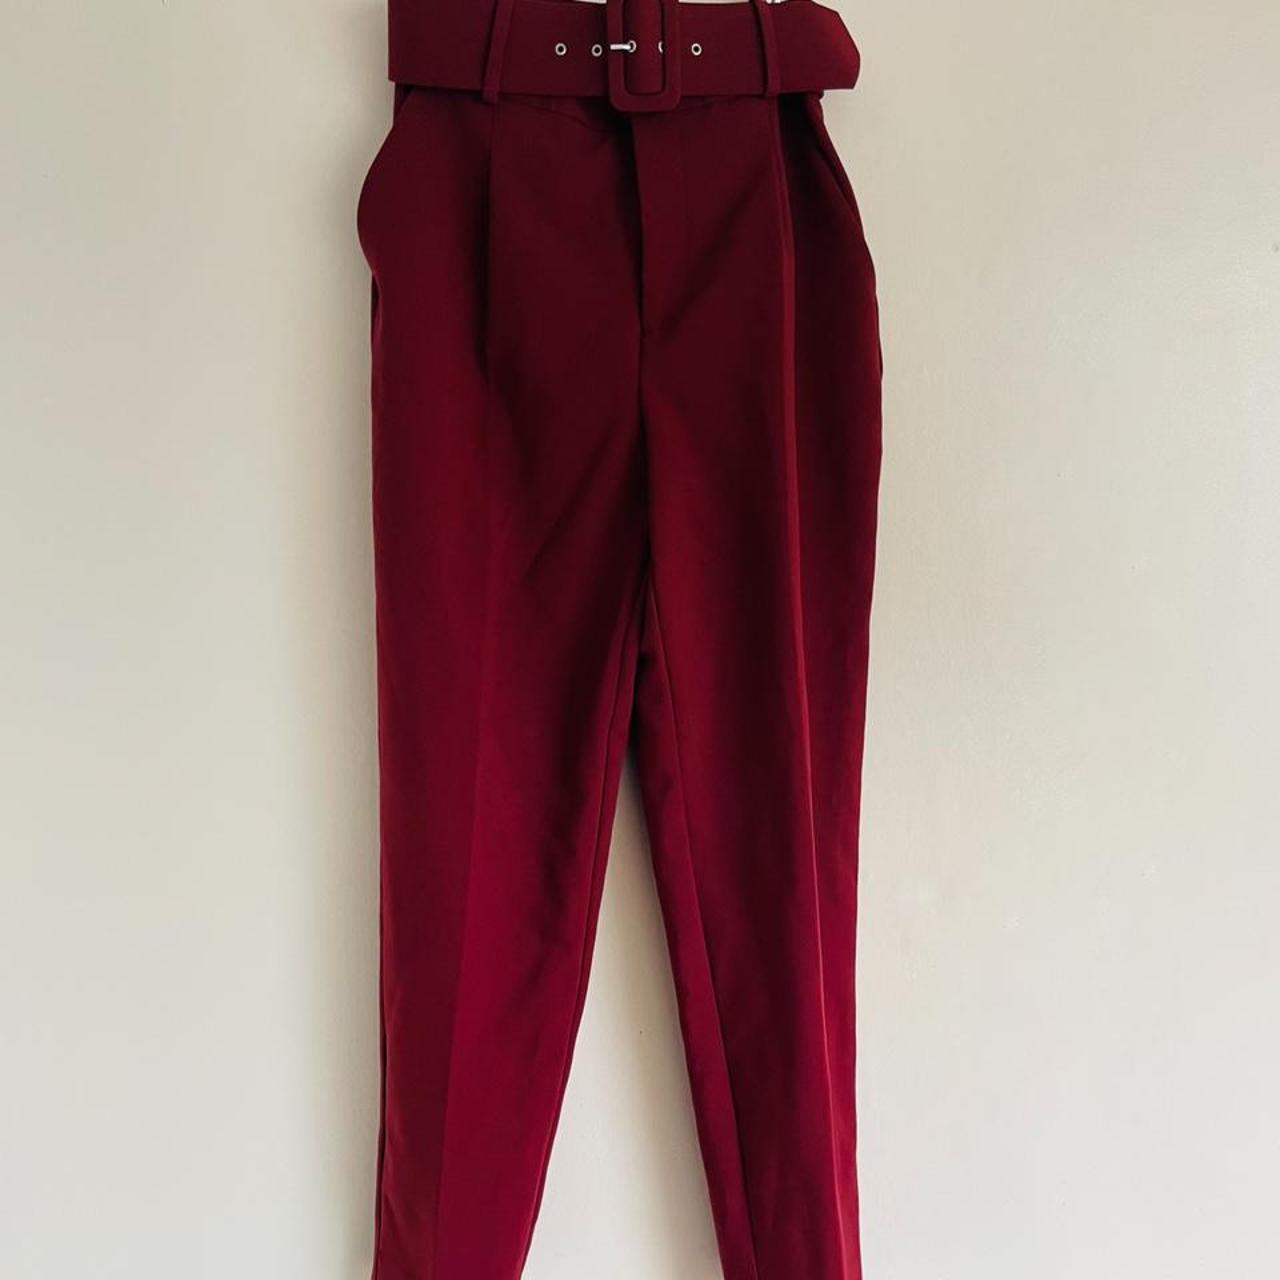 Zara red high waisted trousers with belt (Size XS)... - Depop